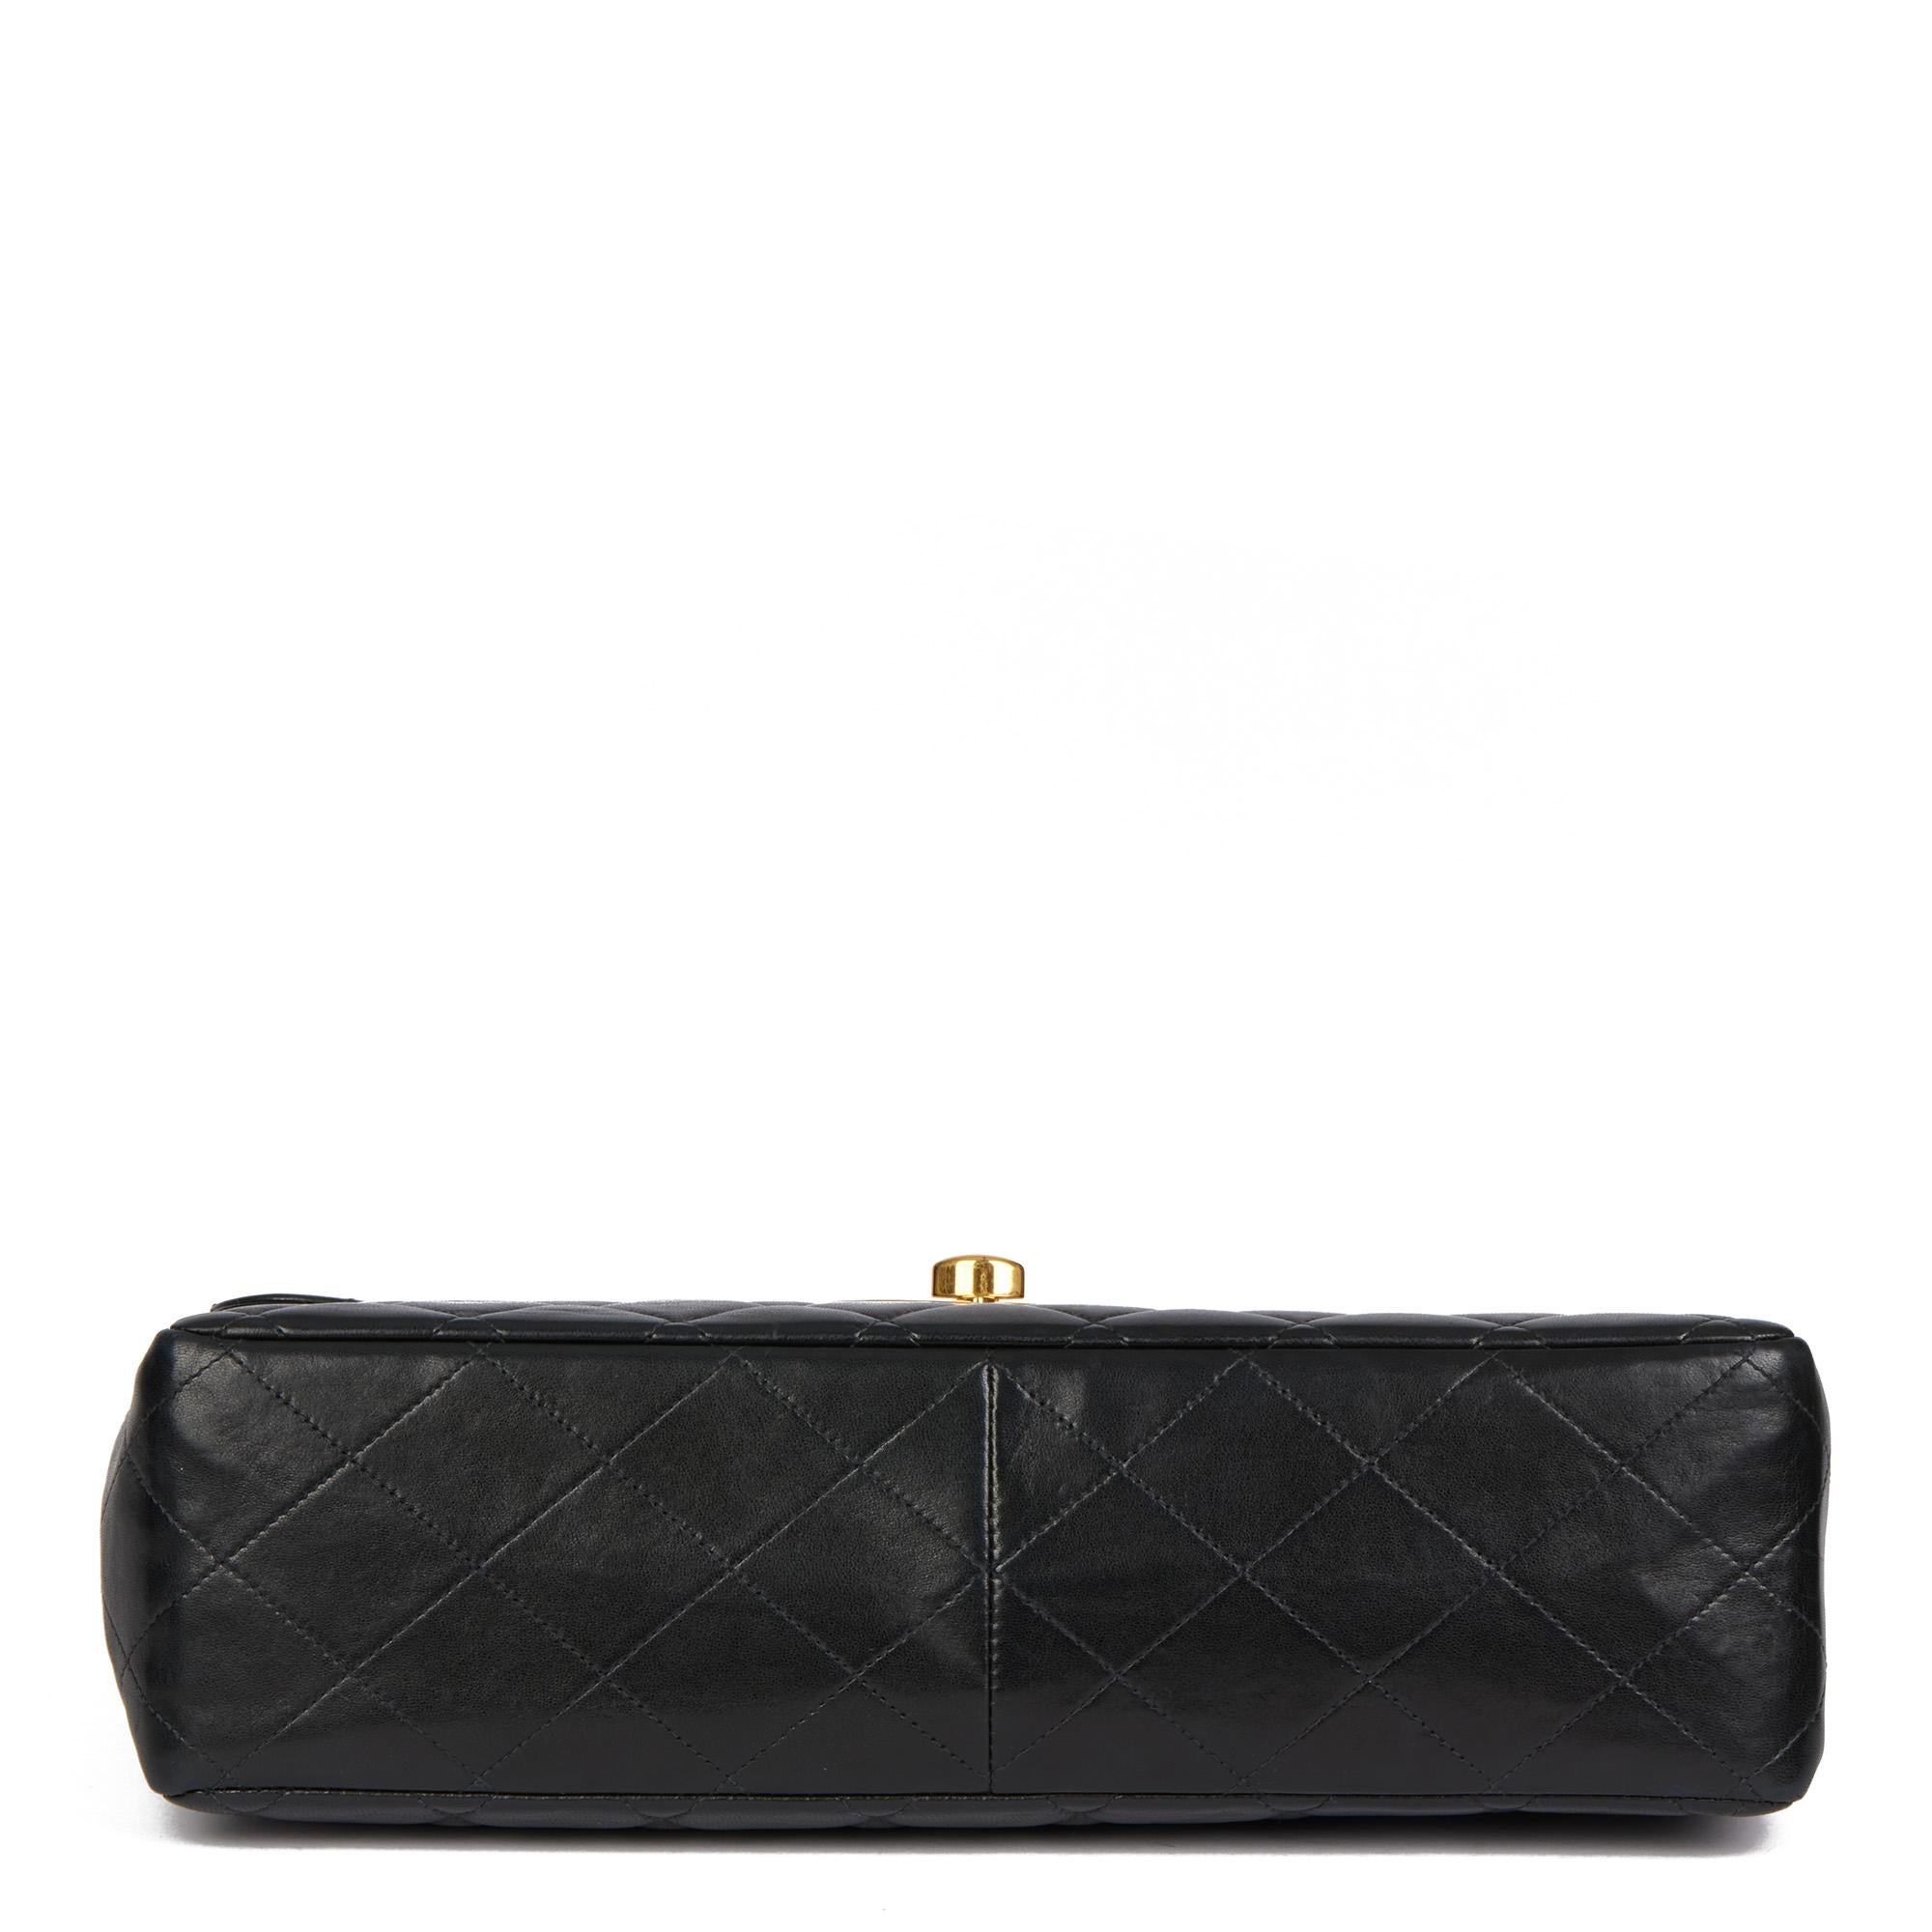 CHANEL Black Quilted Lambskin Vintage Jumbo XL Classic Single Flap Bag 2